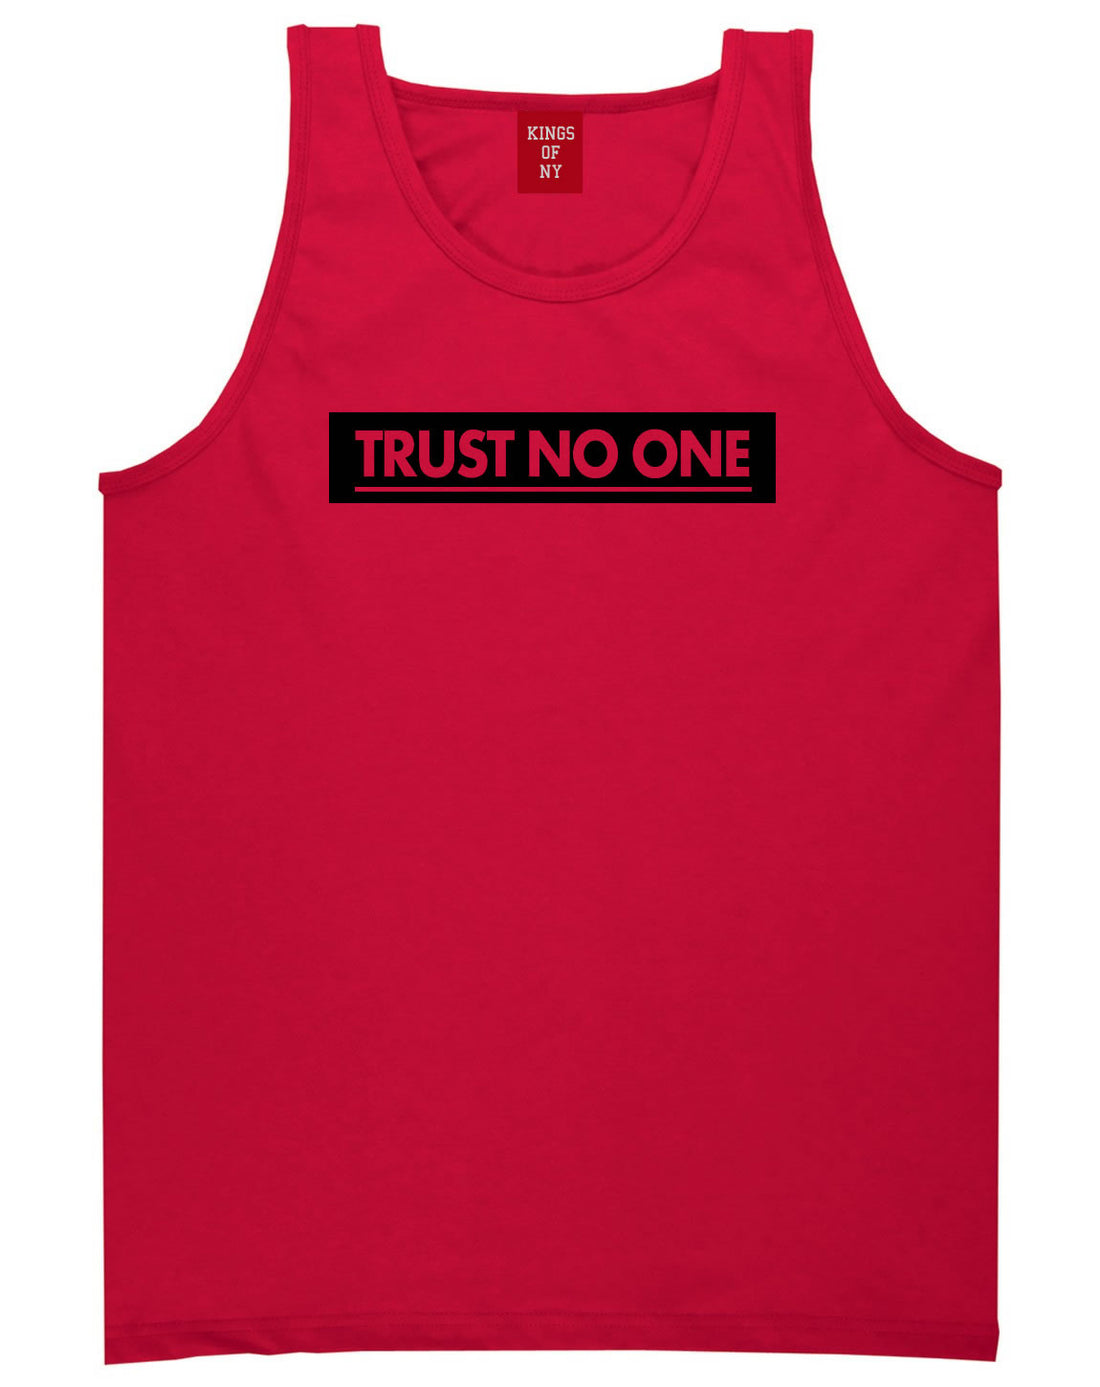 Trust No One Tank Top in Red By Kings Of NY